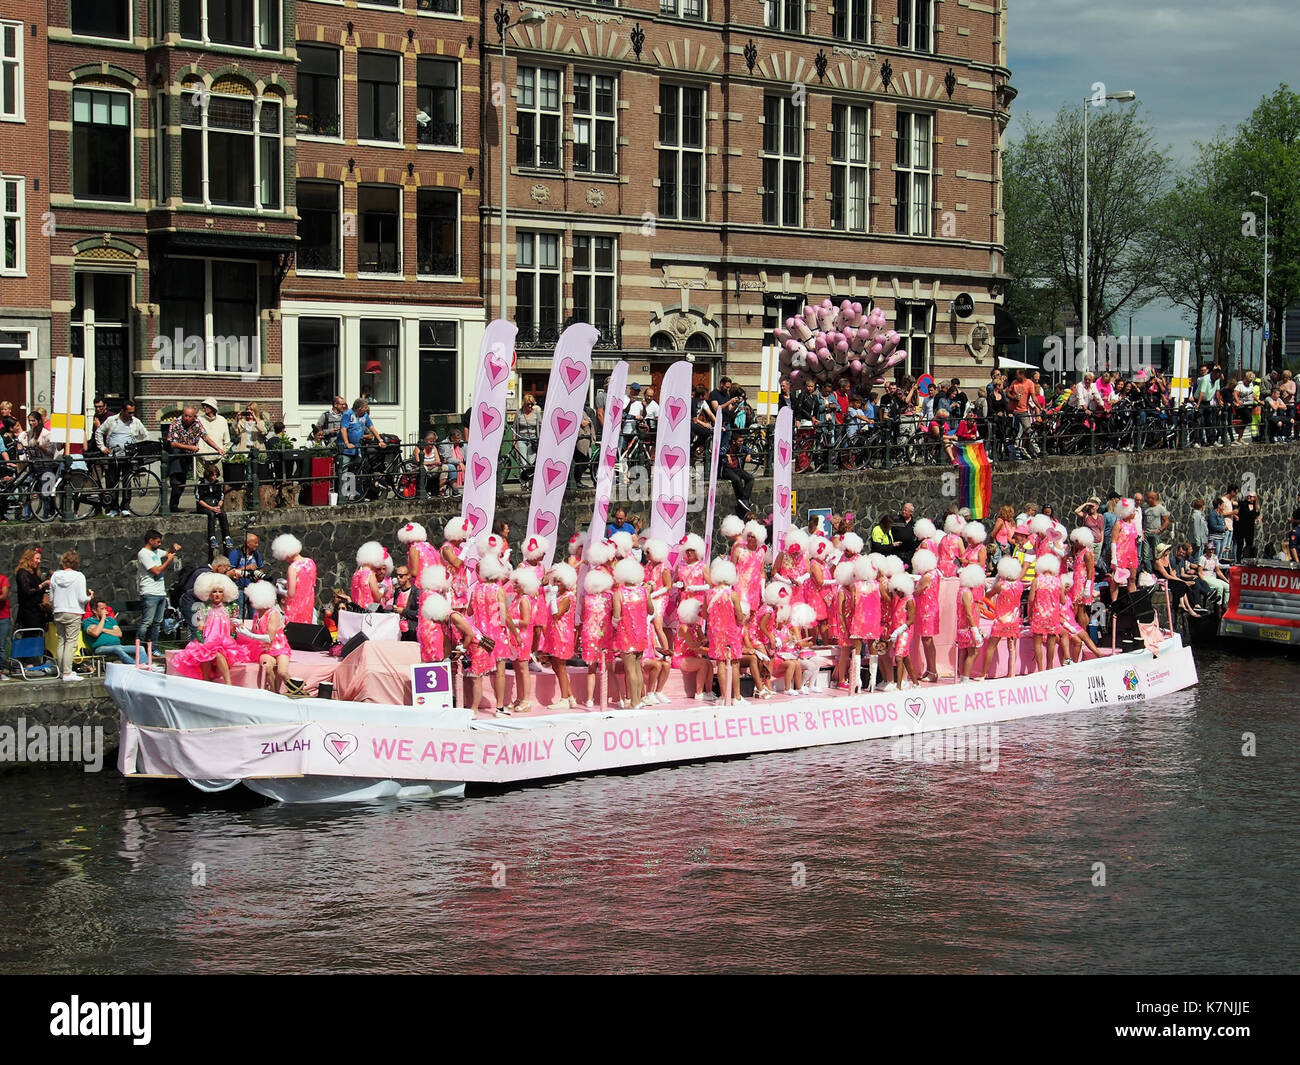 Boat 3 Dolly Bellefleur & Friends, Canal Parade Amsterdam 2017 foto 2 Stock Photo